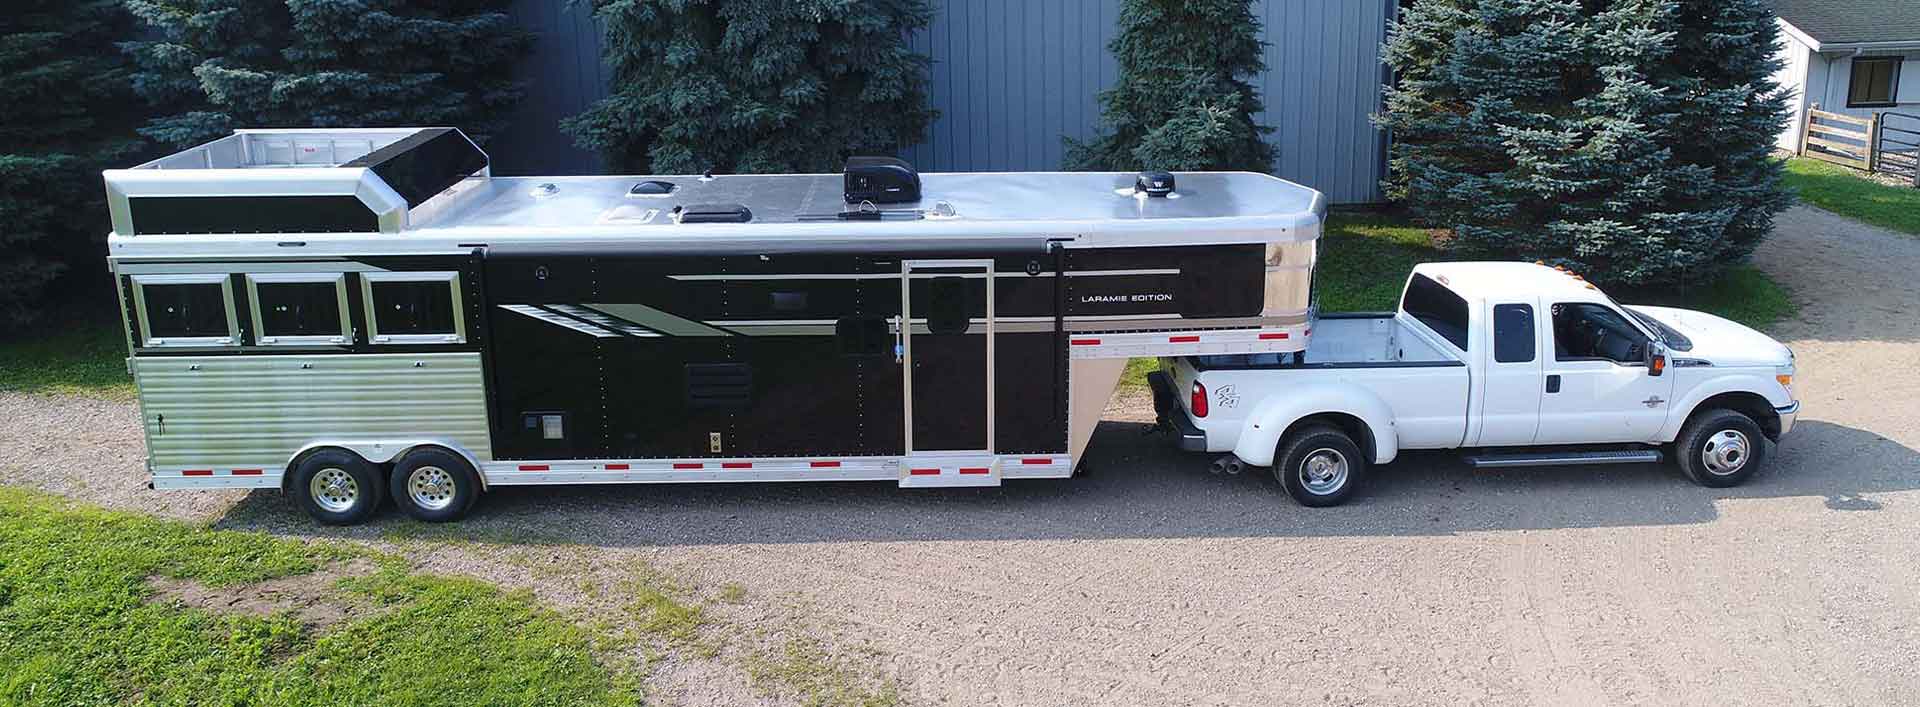 We are your authorized SMC trailer dealer